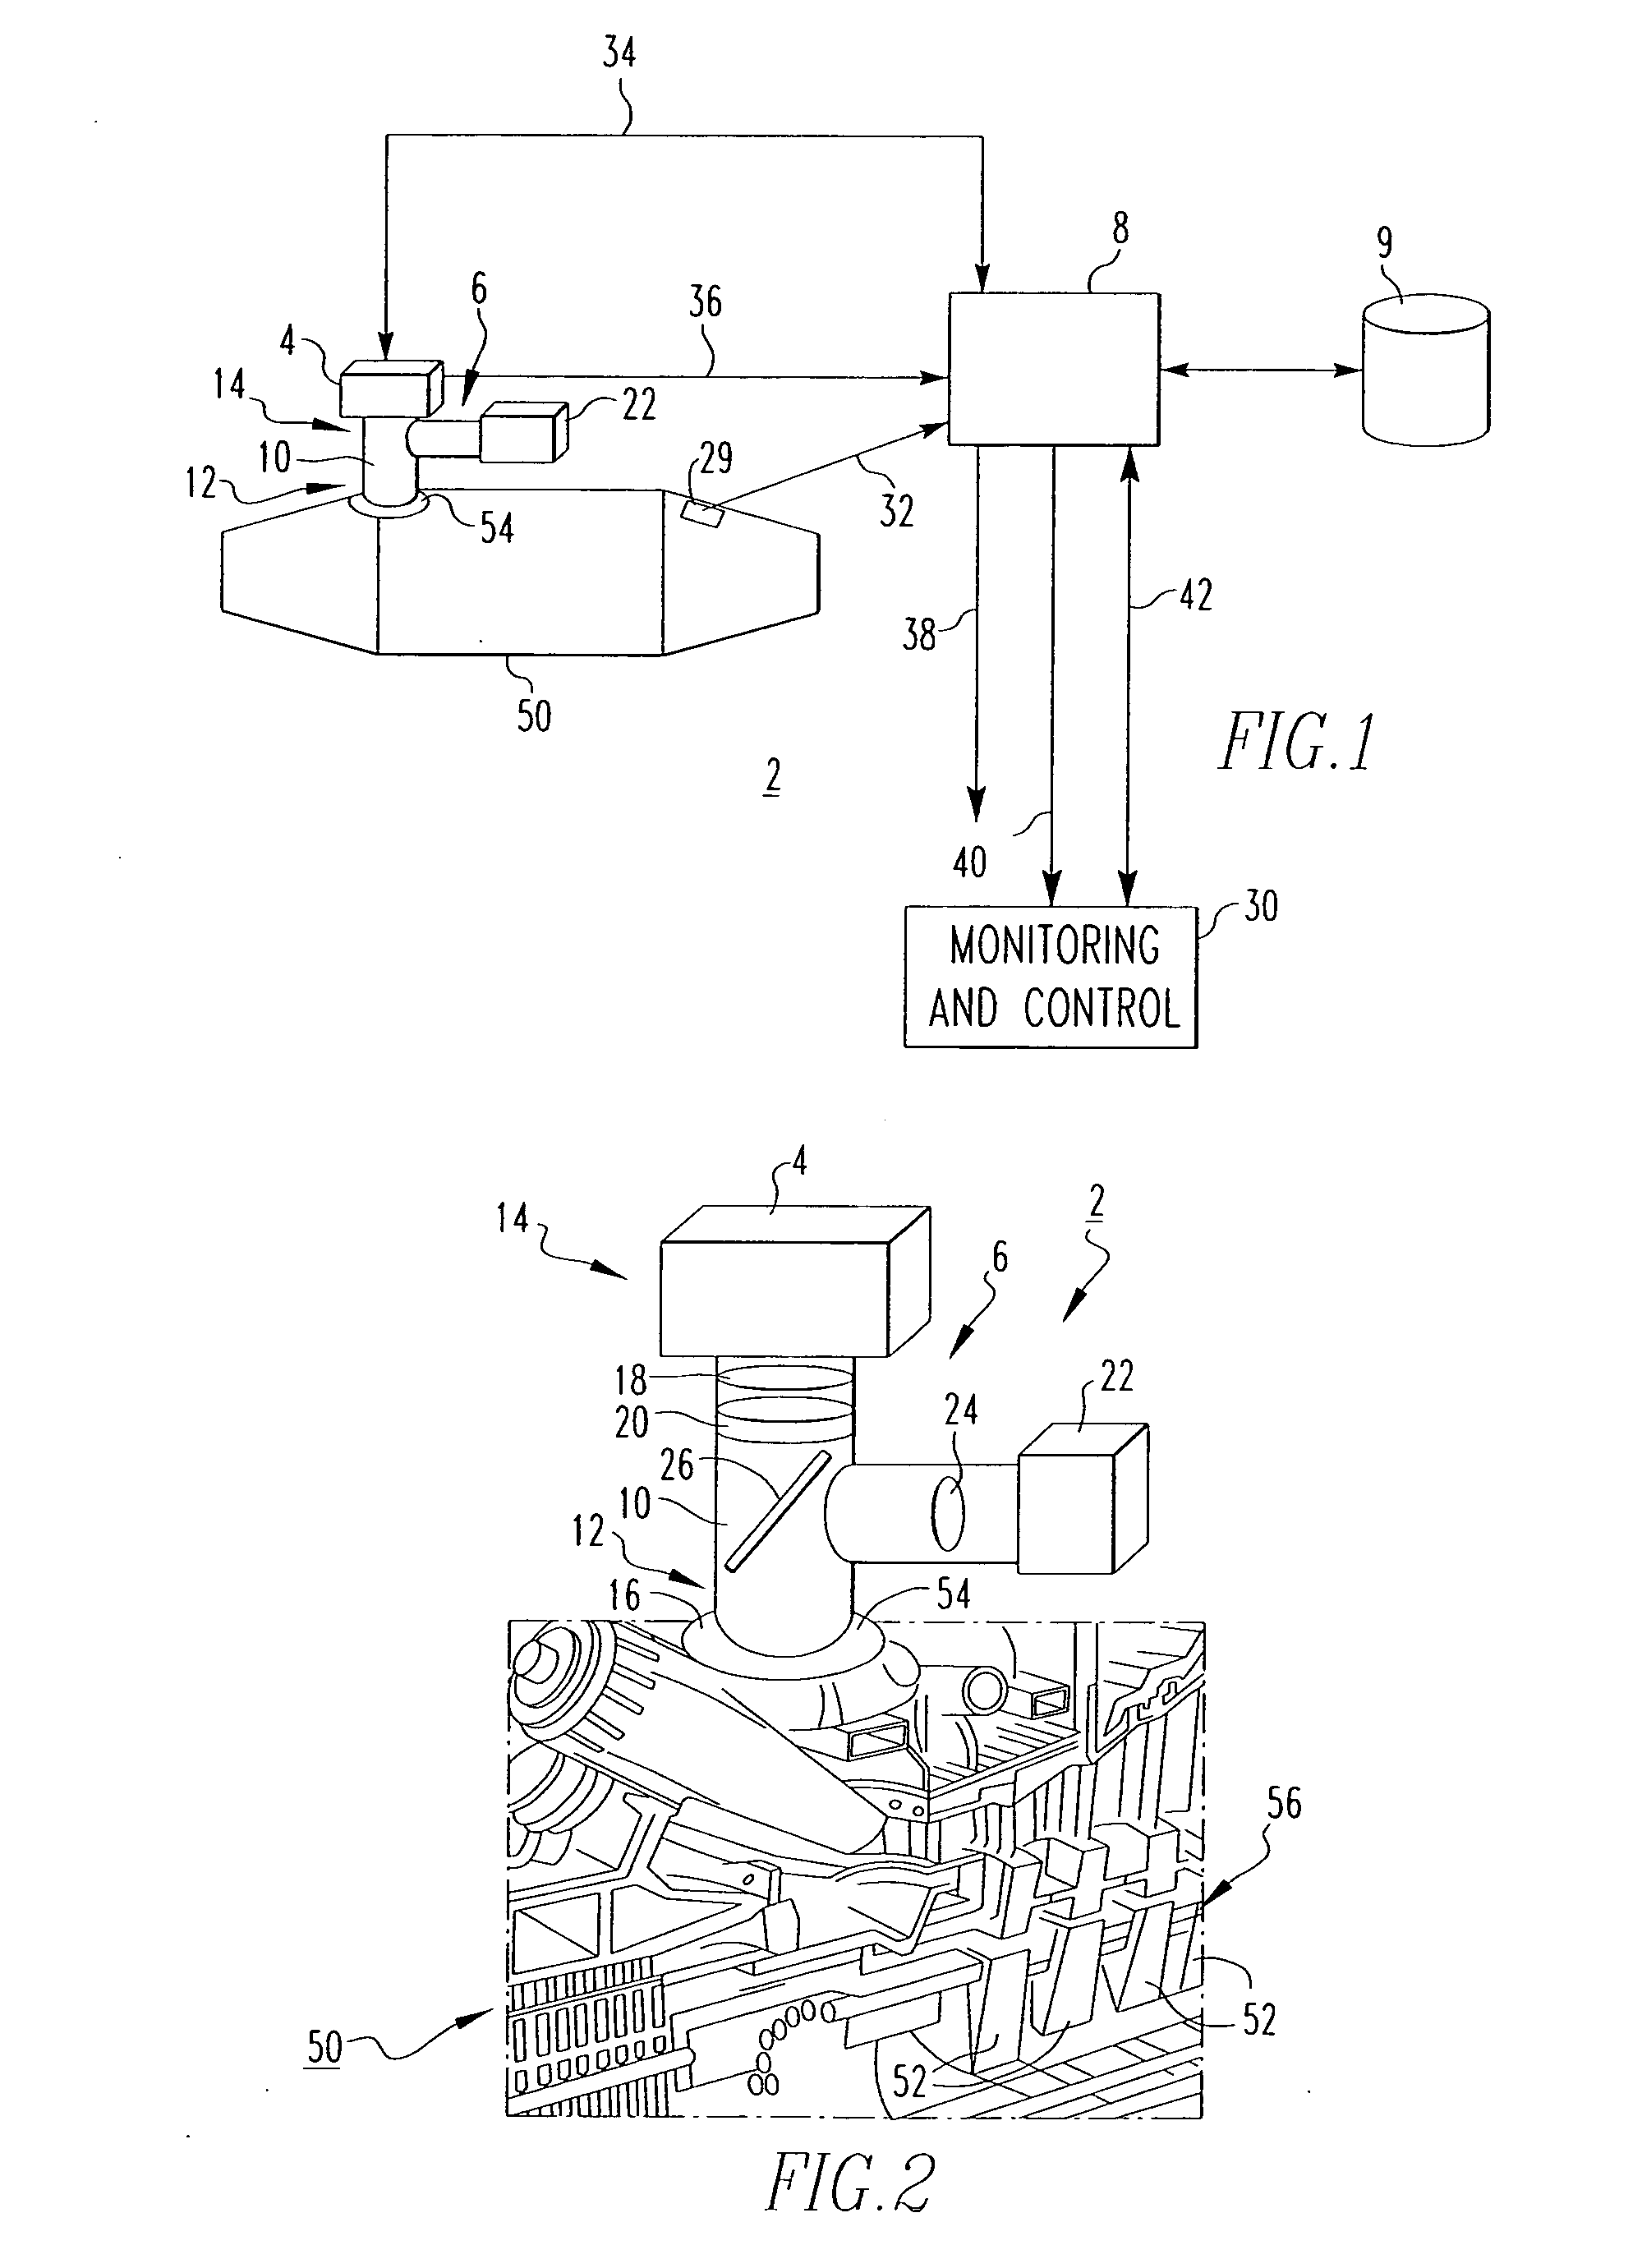 Method of visually inspecting turbine blades and optical inspection system therefor